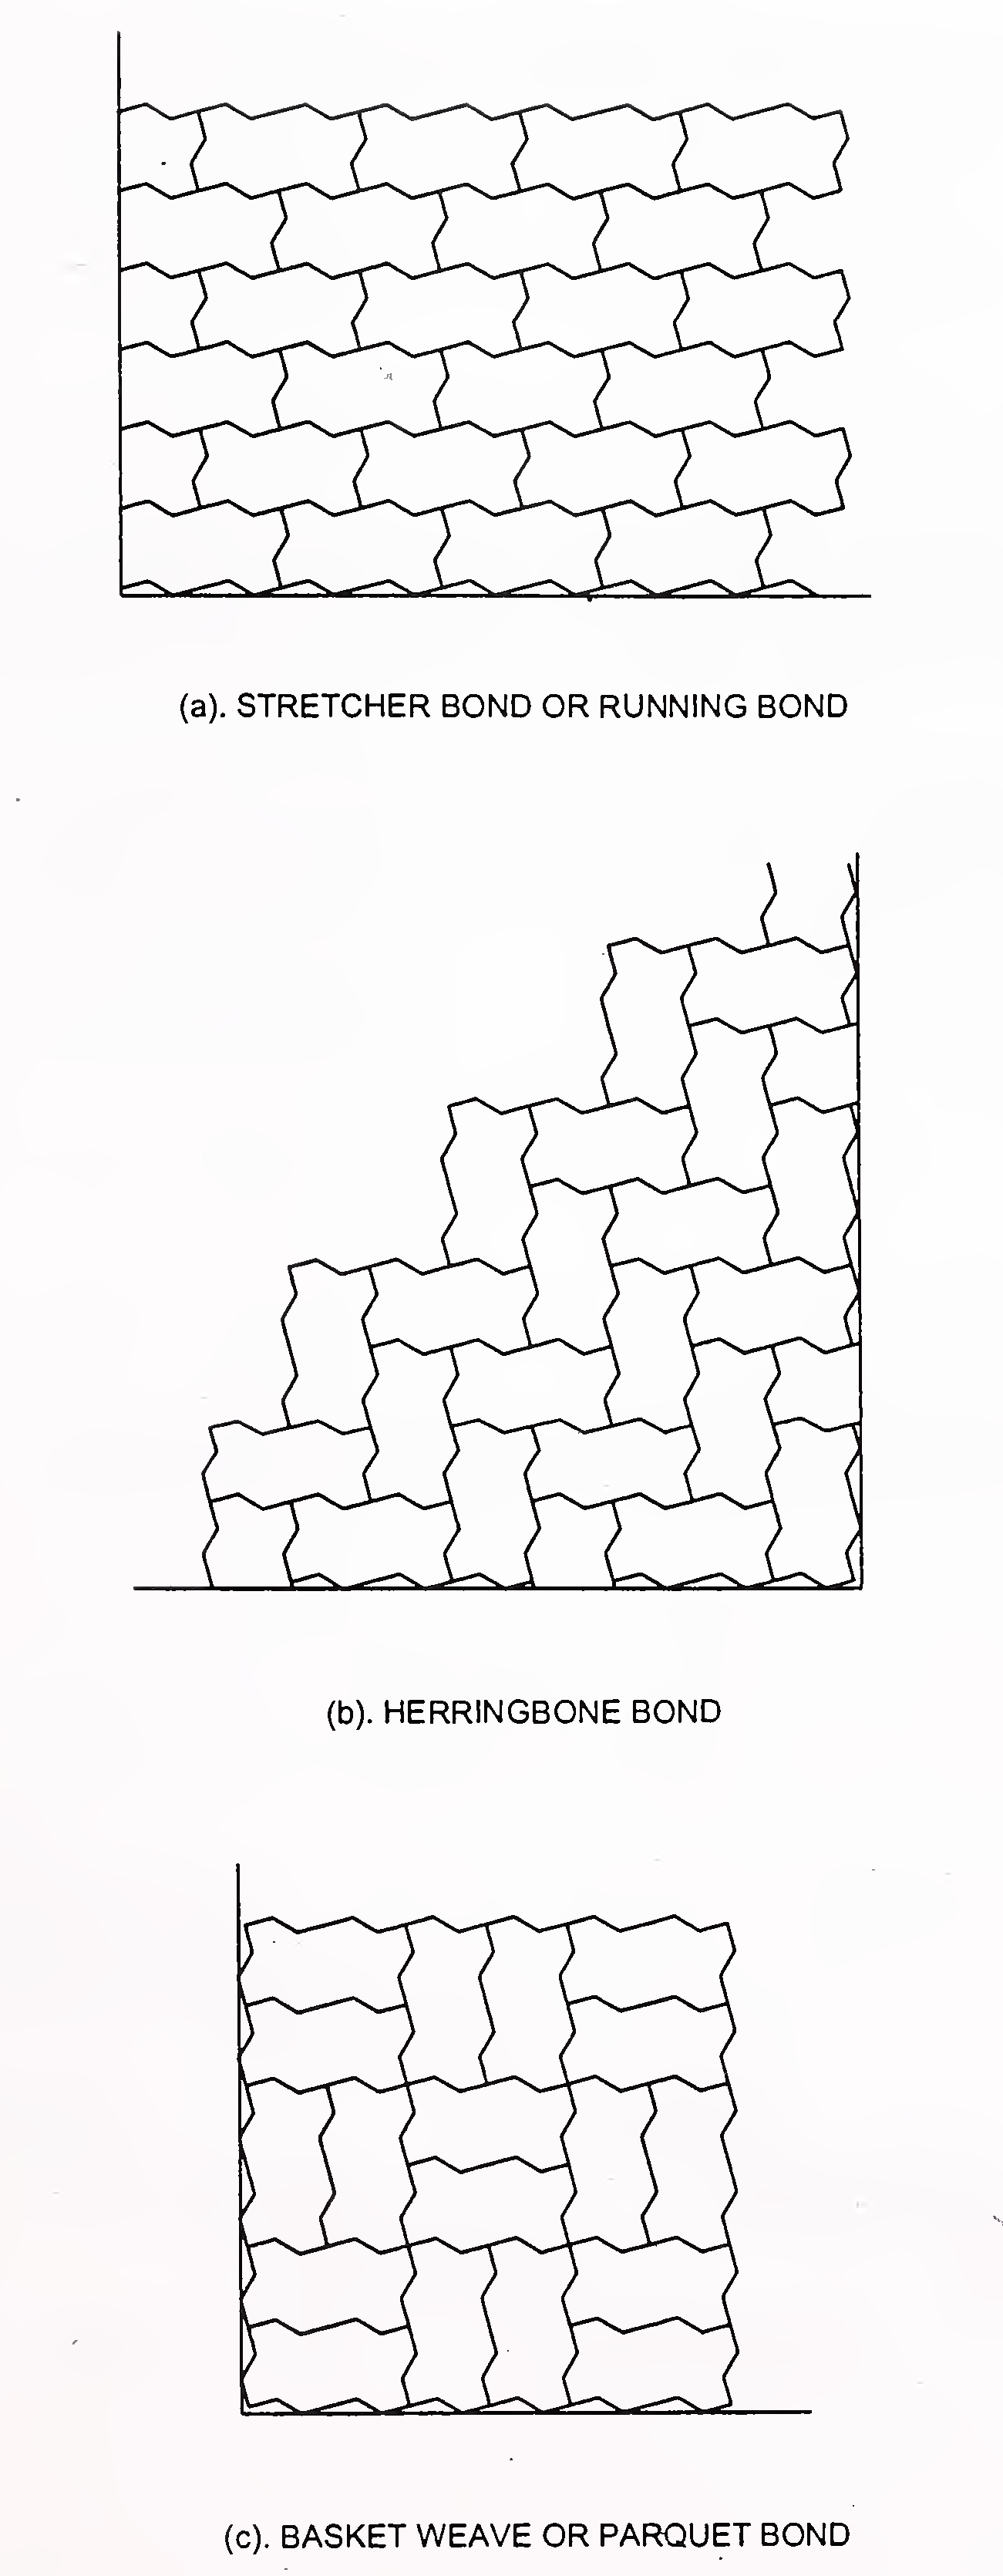 Fig. 14. Typical bond or laying pattern of bond